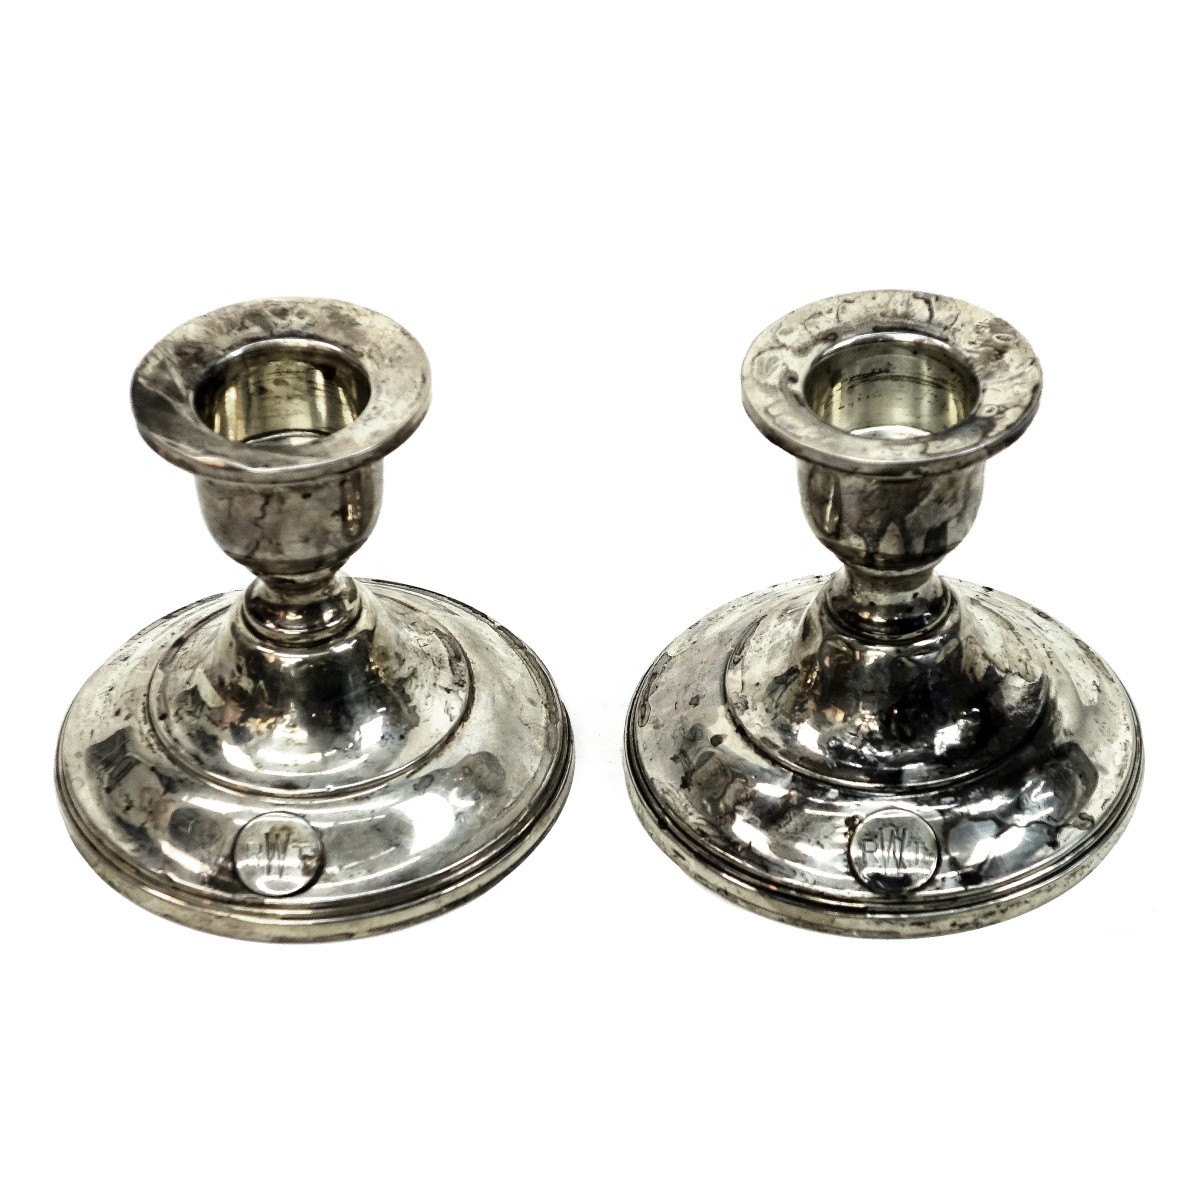 Pair of B. Altman Co. Candle Holders